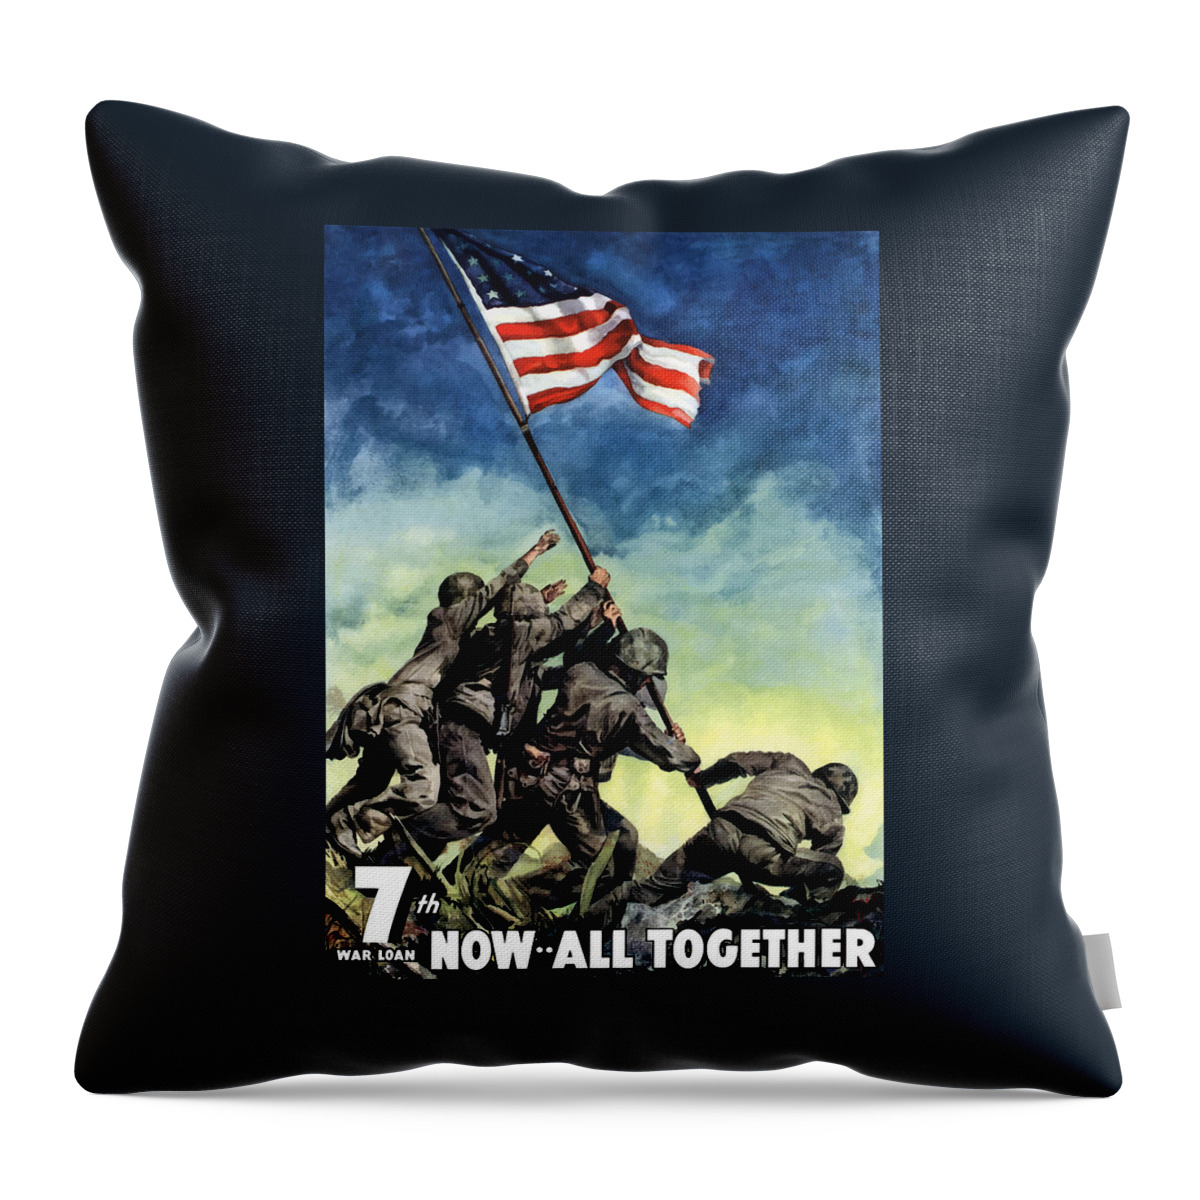 Iwo Jima Throw Pillow featuring the painting Raising The Flag On Iwo Jima by War Is Hell Store